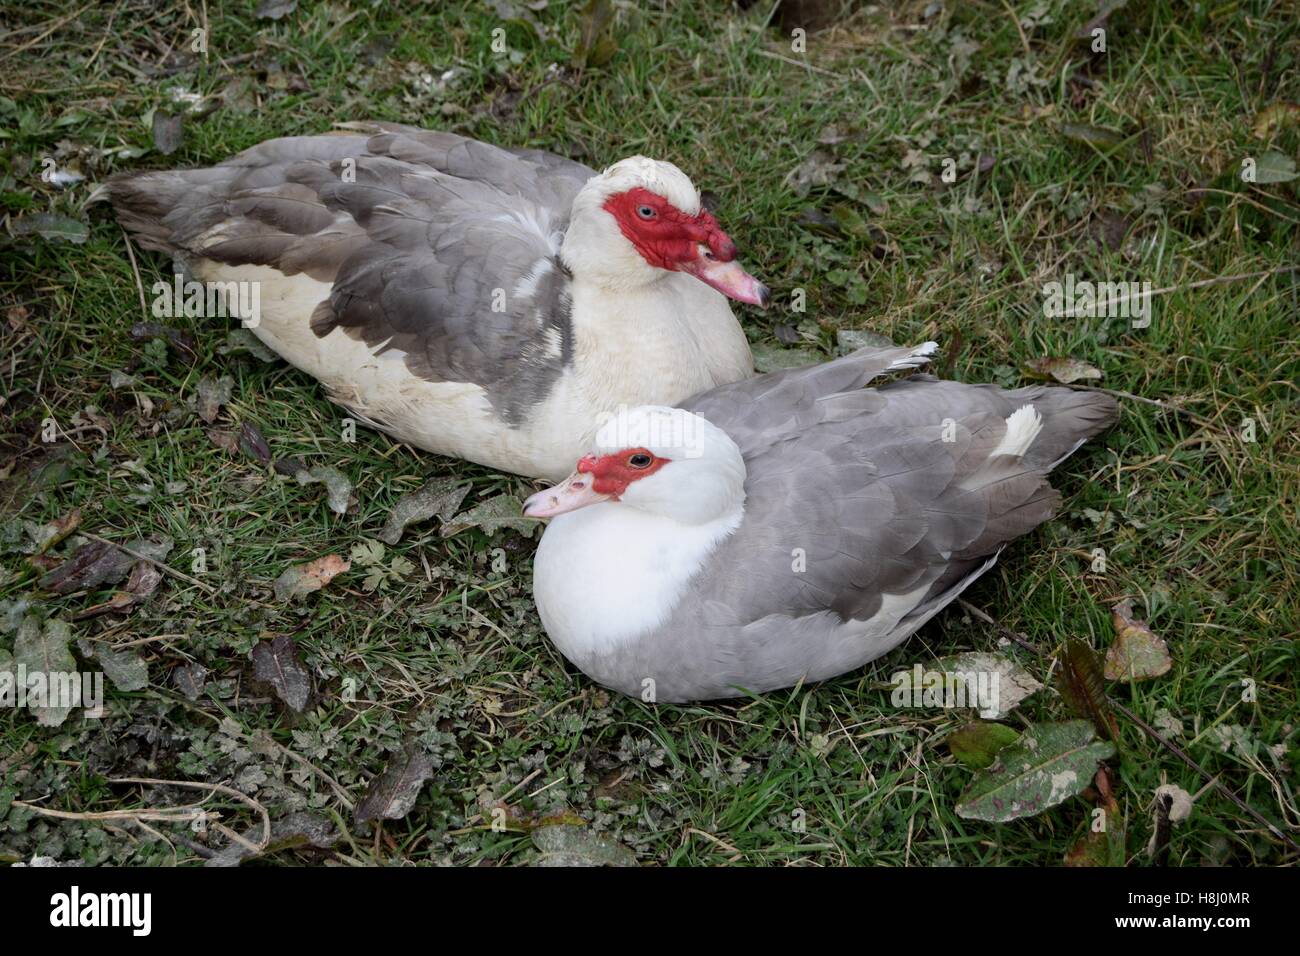 A breeding pair of Muscobvy ducks lavender Stock Photo